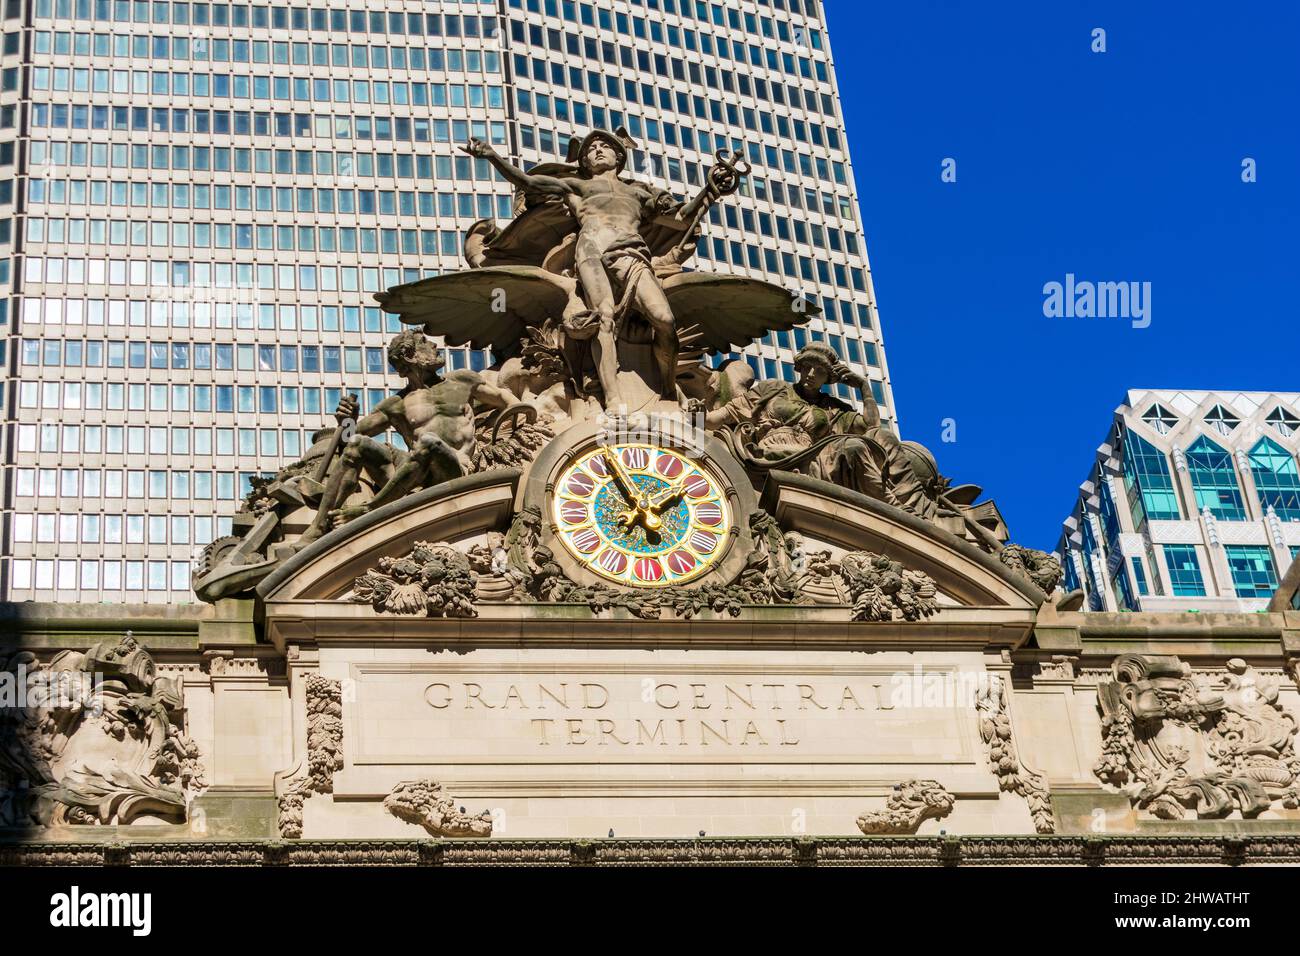 Grand Central Terminal sign, Glory of Commerce sculptural group above large clock atop the terminal facade - New York, USA, 2022 Stock Photo